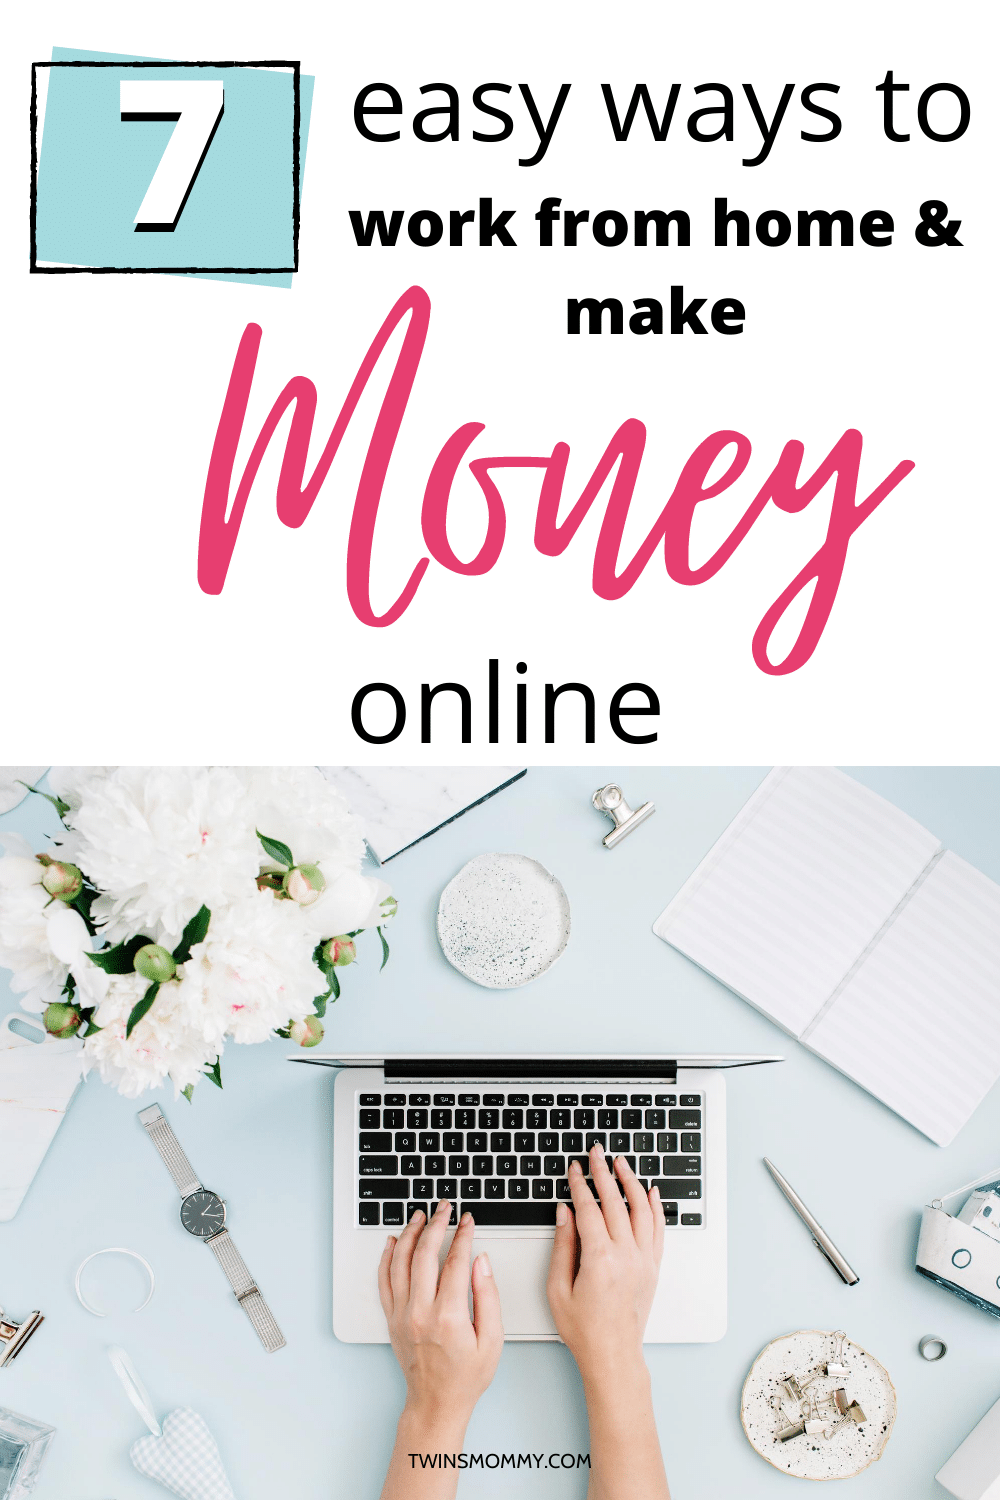 How to make money online by becoming a virtual assistant
